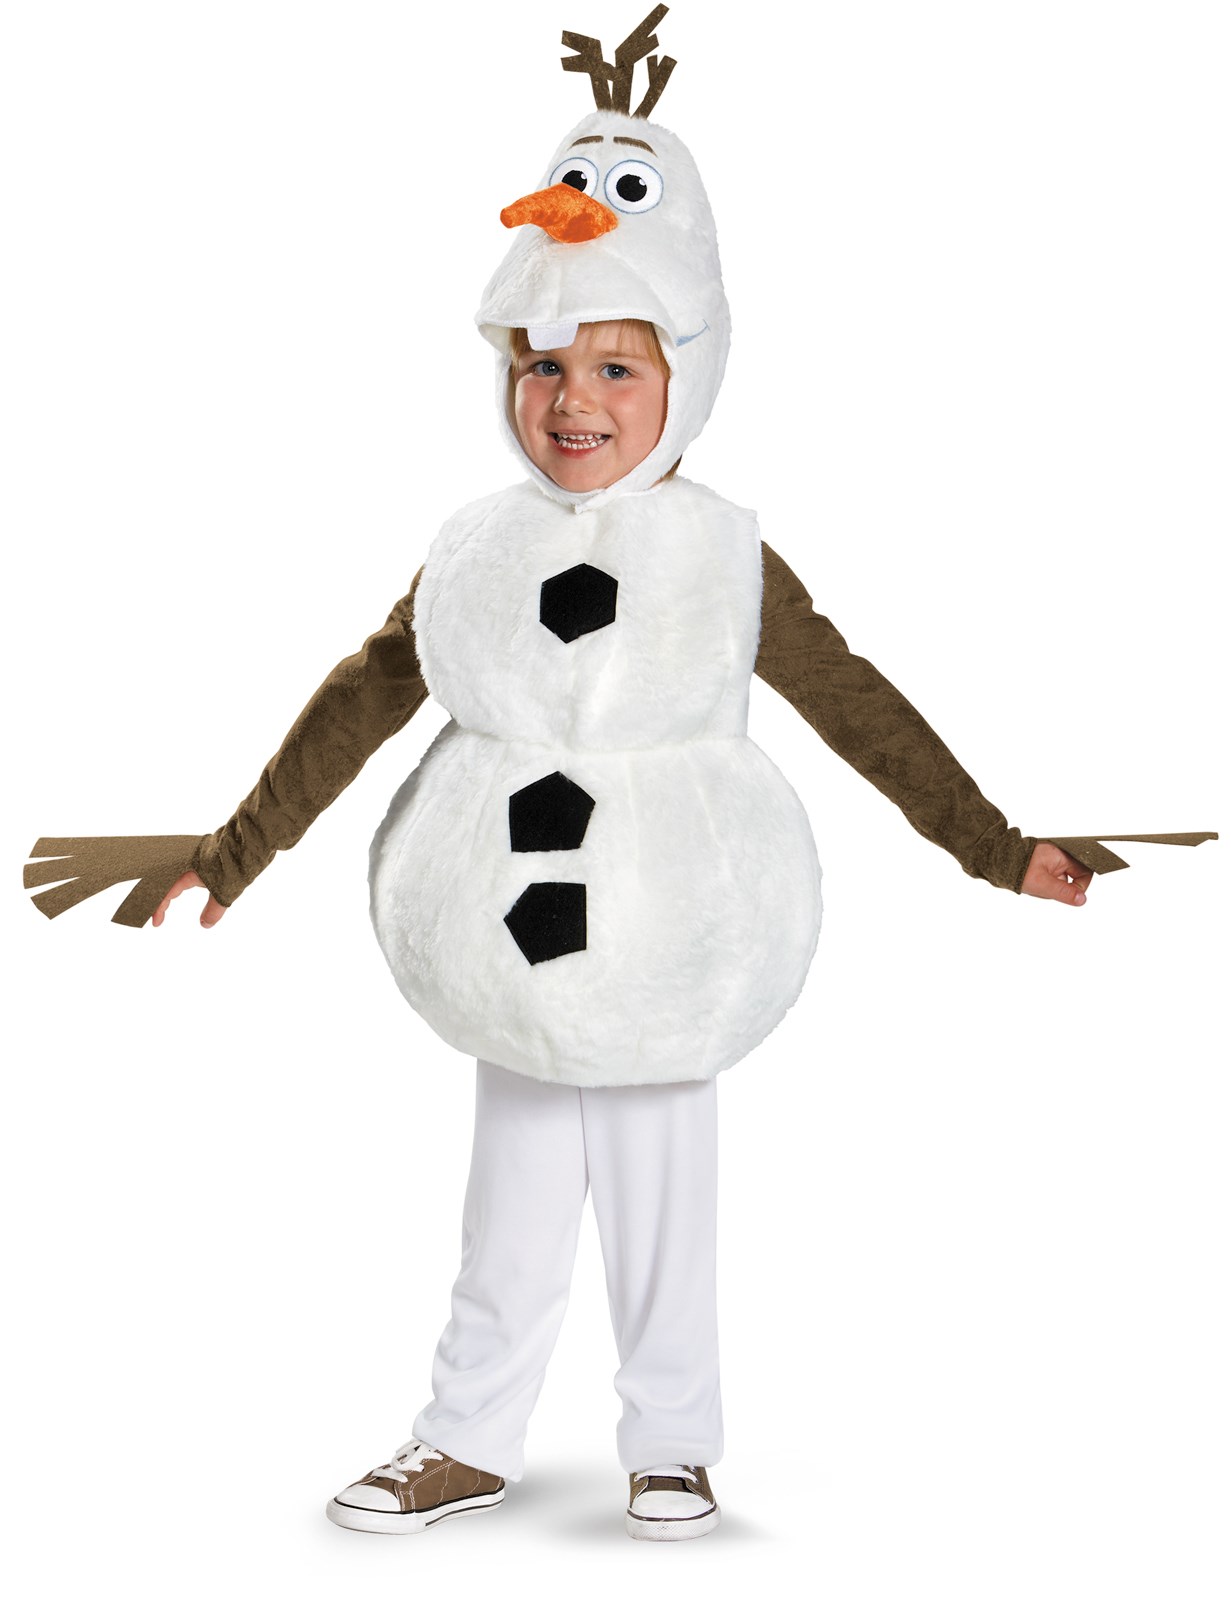 Frozen - Deluxe Olaf Infant / Toddler Costume